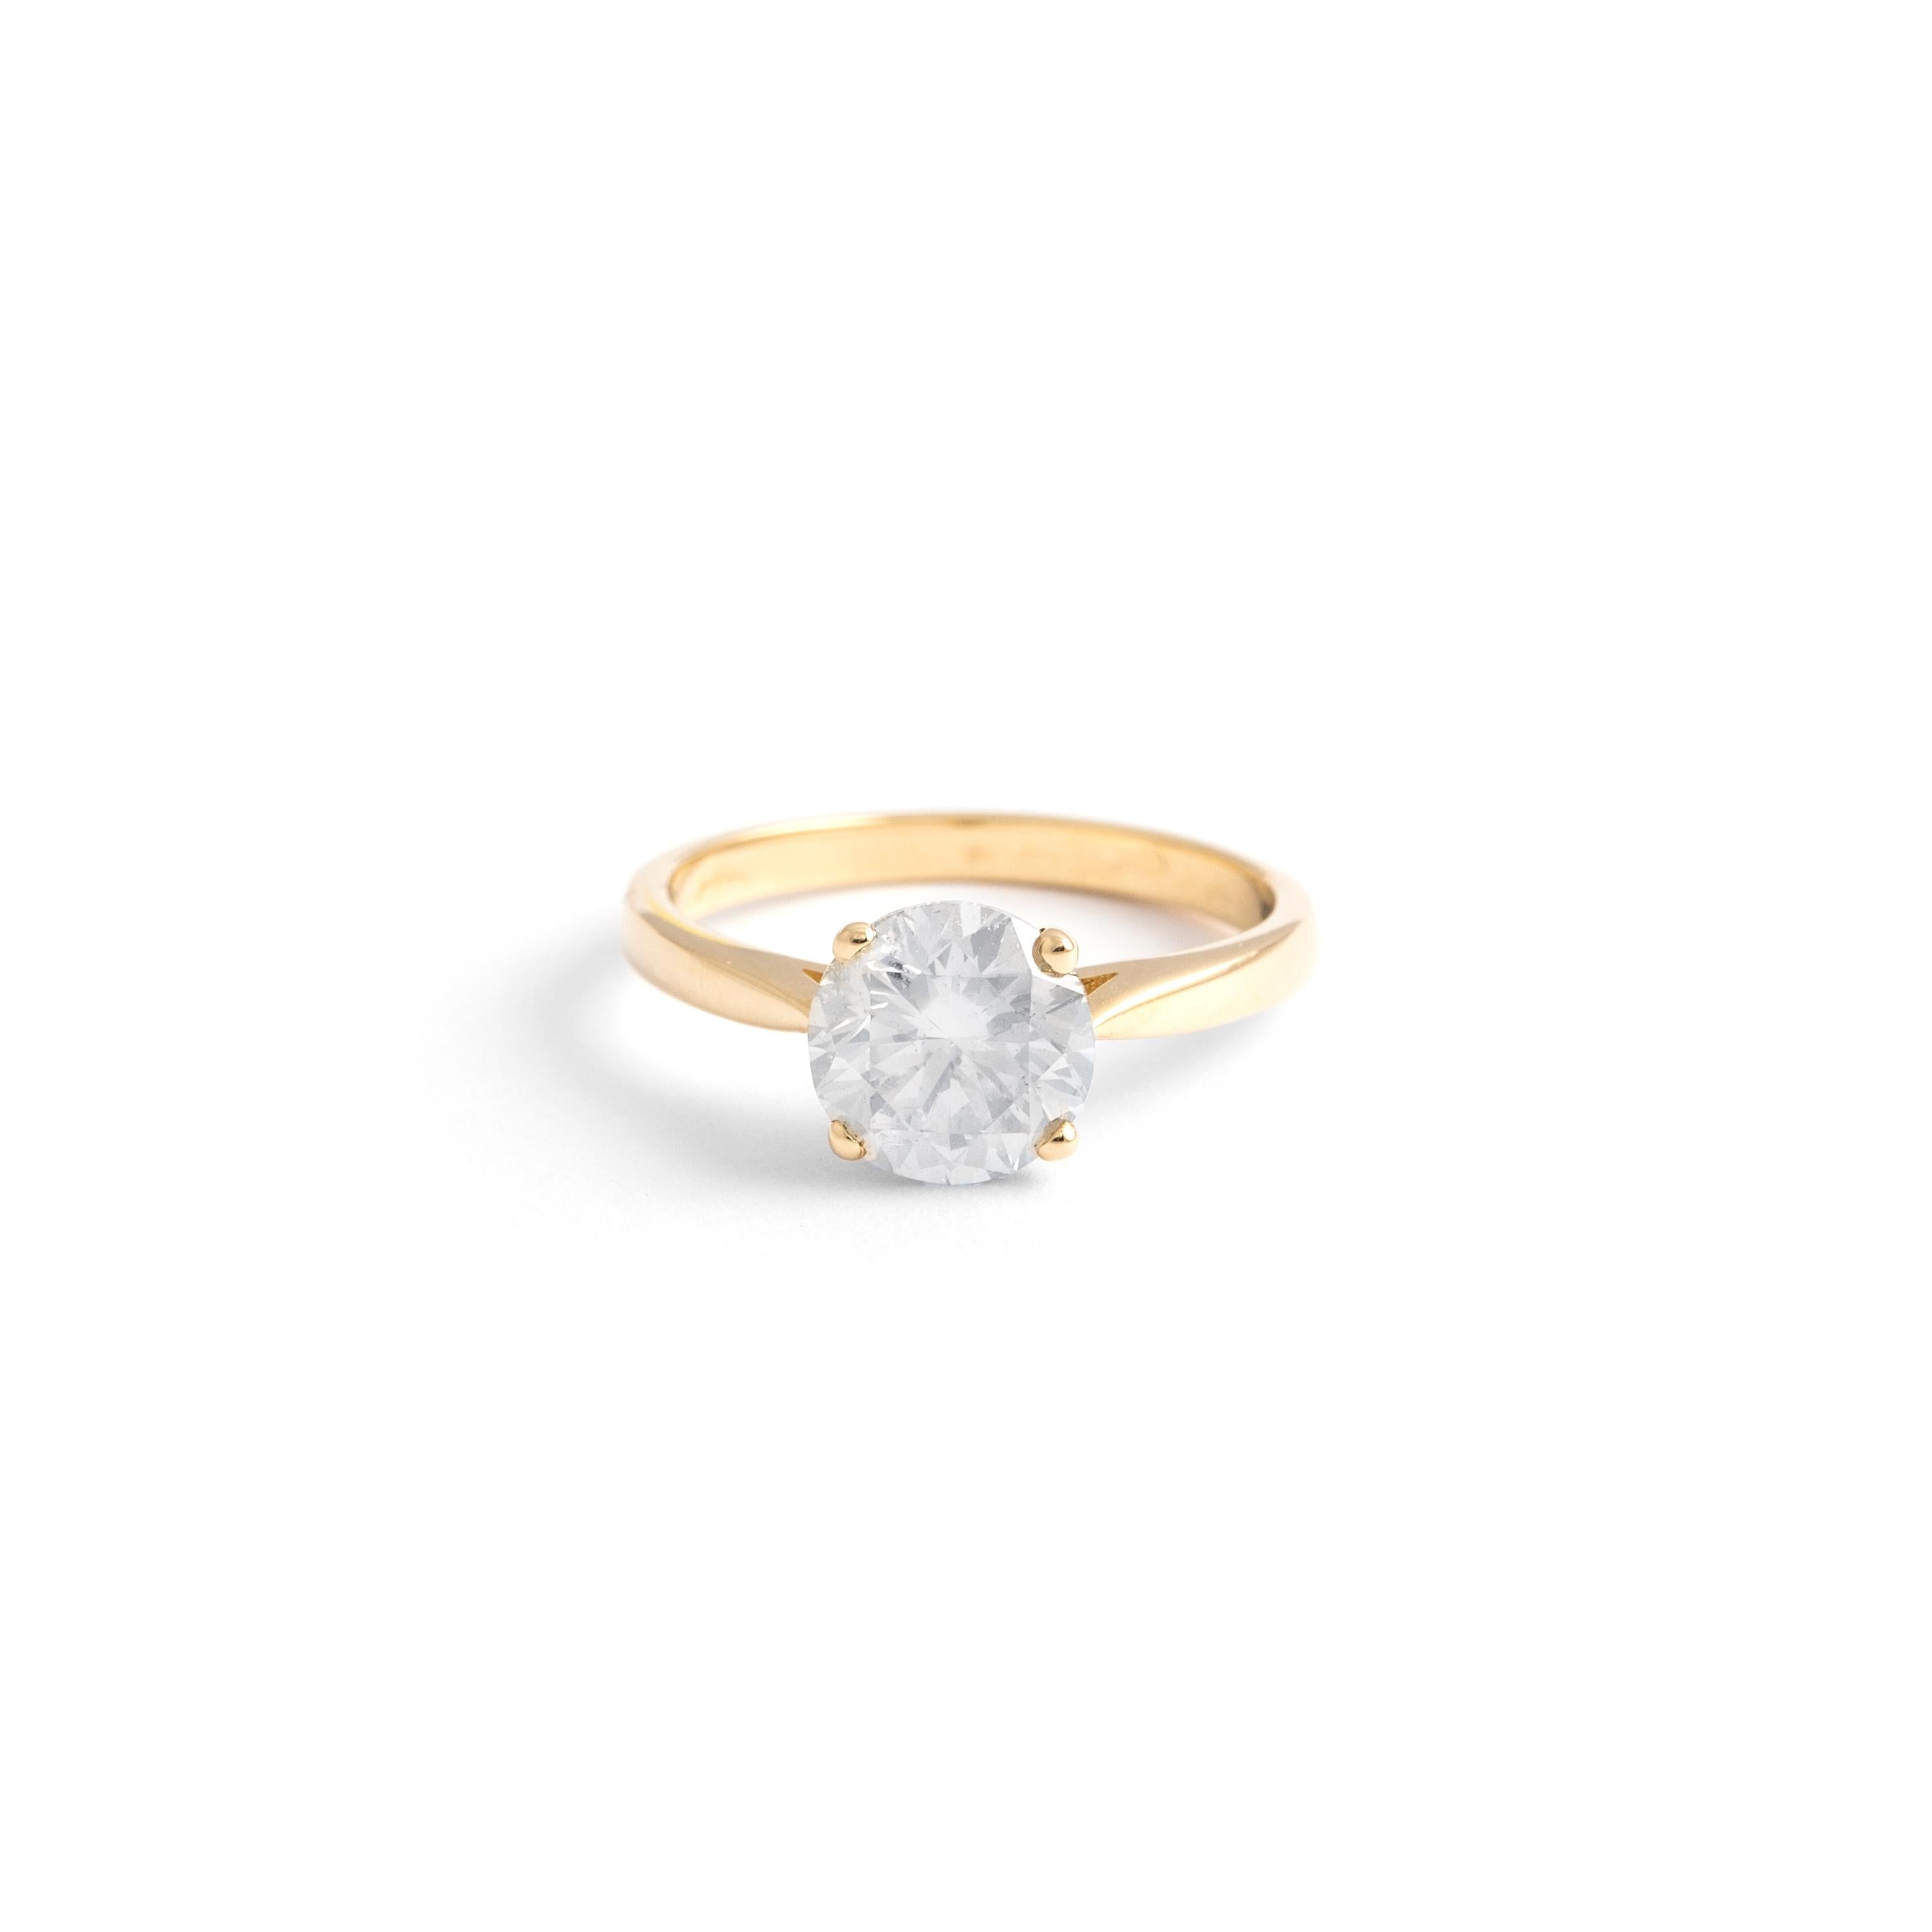 2.01 carat Diamond Solitaire yellow gold 14K Ring.
According AIG certificate:
Round cut Natural Diamond weighting 2.01 carat.
Natural Fancy Yellowish Gray
SI3
Gross weight: 2.79 grams.